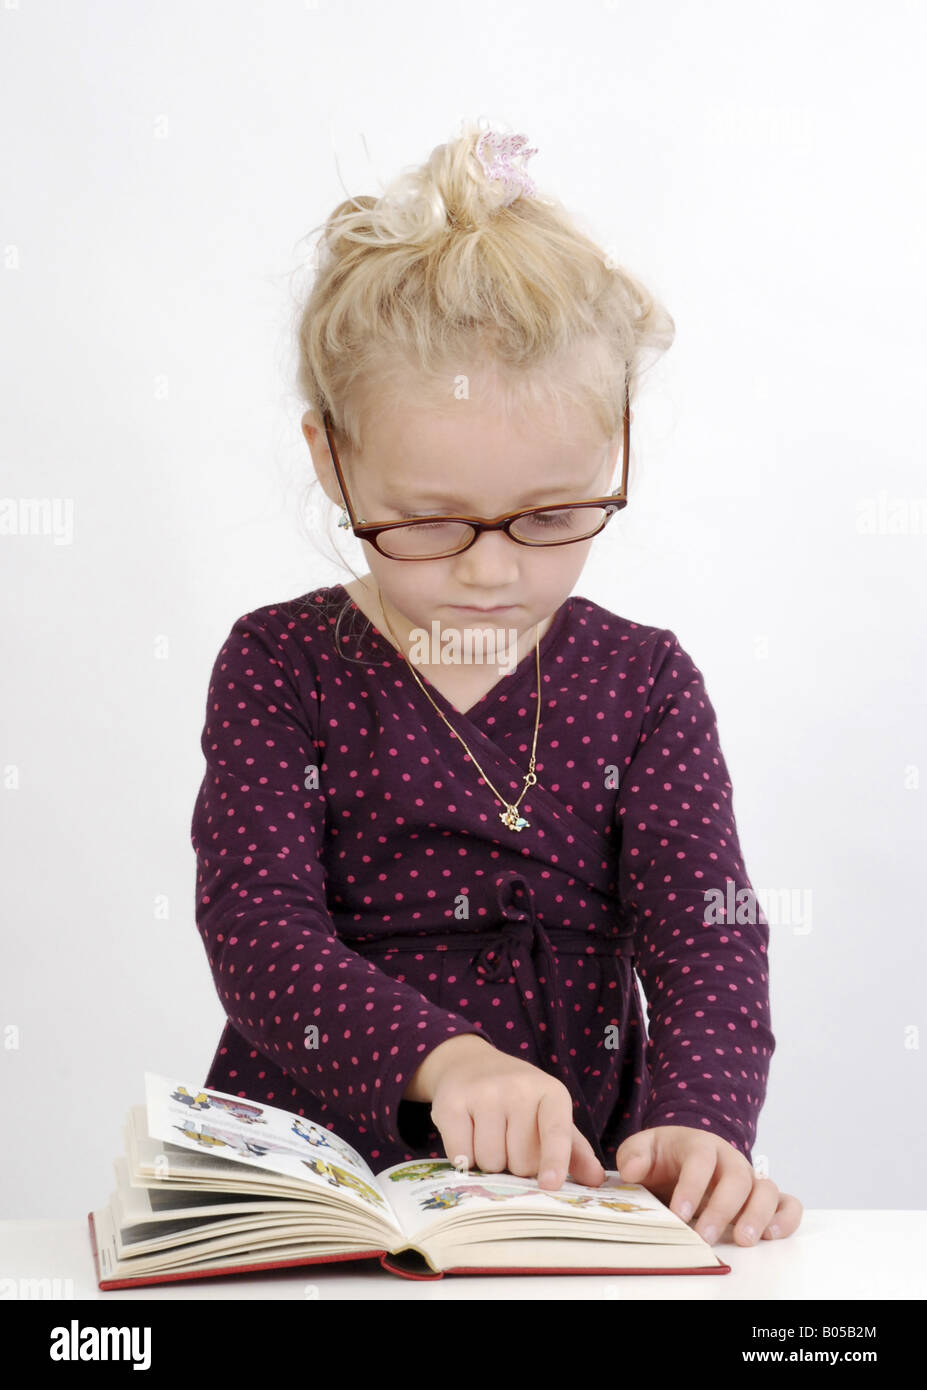 little girl reading a book Stock Photo